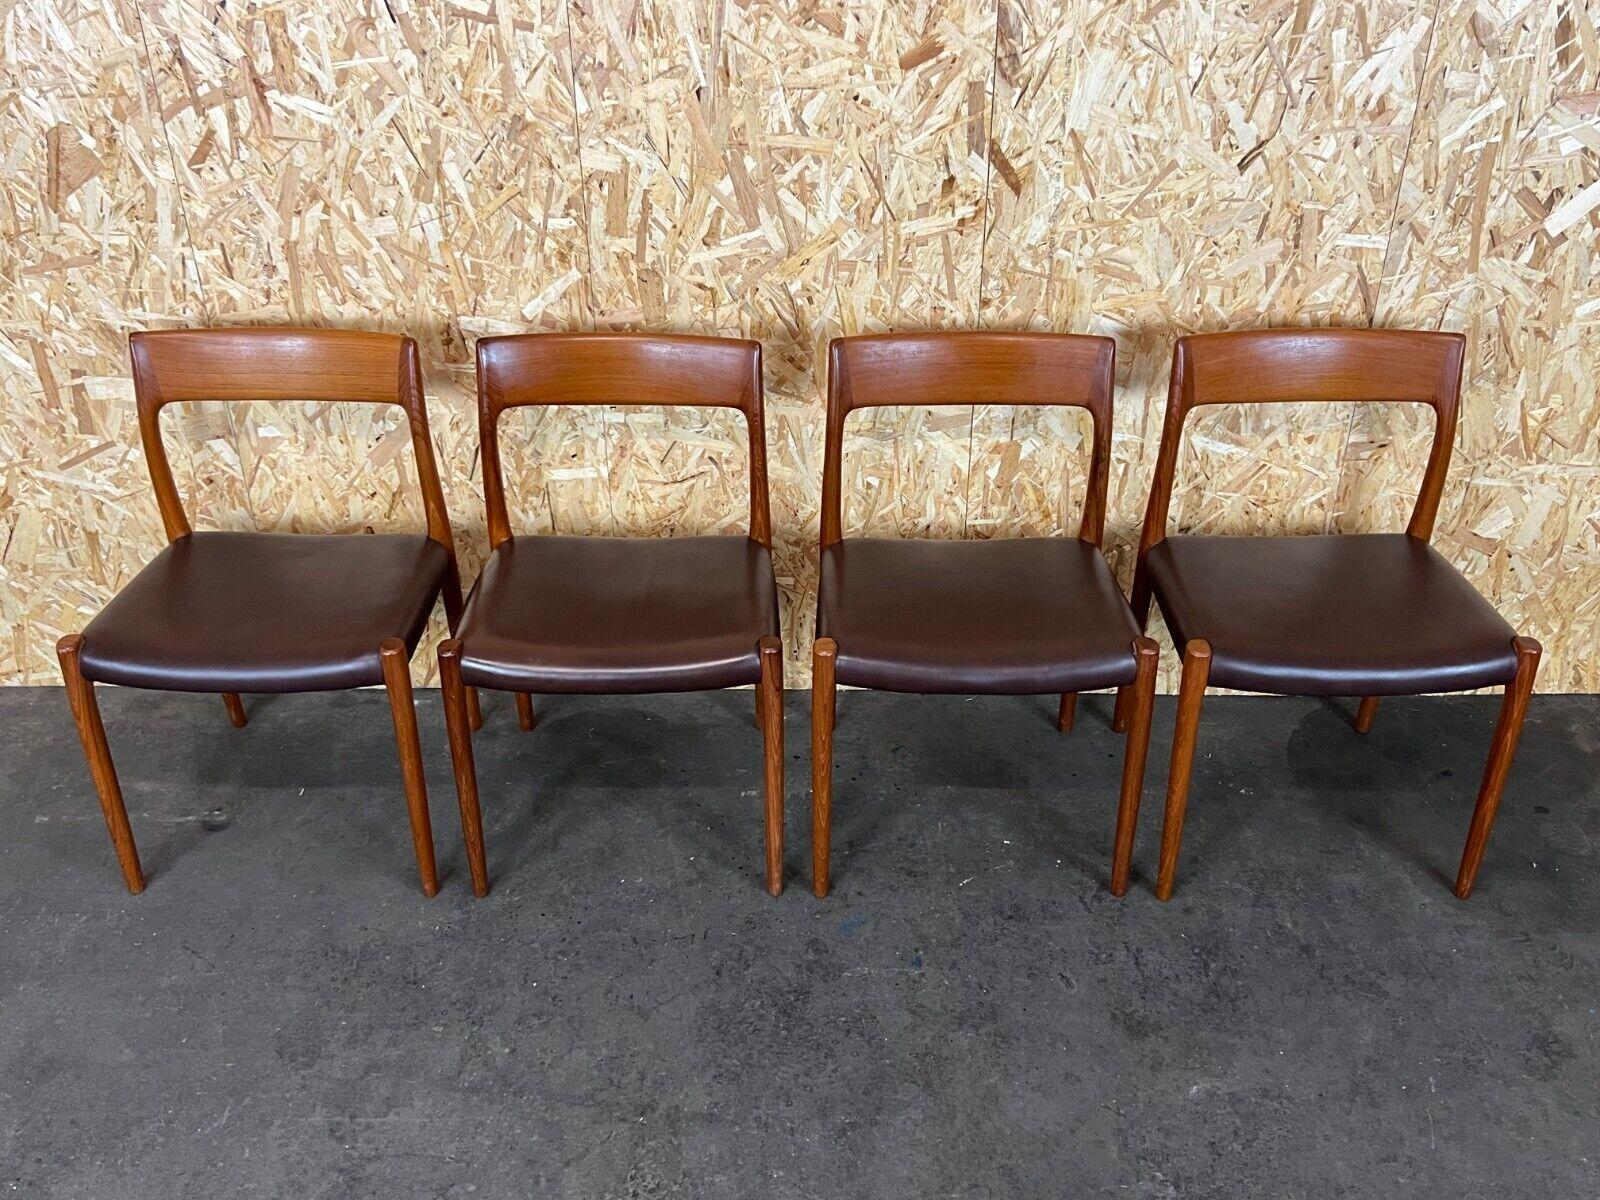 4x 60s 70s Chairs Teak Dining Chair Niels O. Möller for J.L. Moller's 60s In Good Condition For Sale In Neuenkirchen, NI